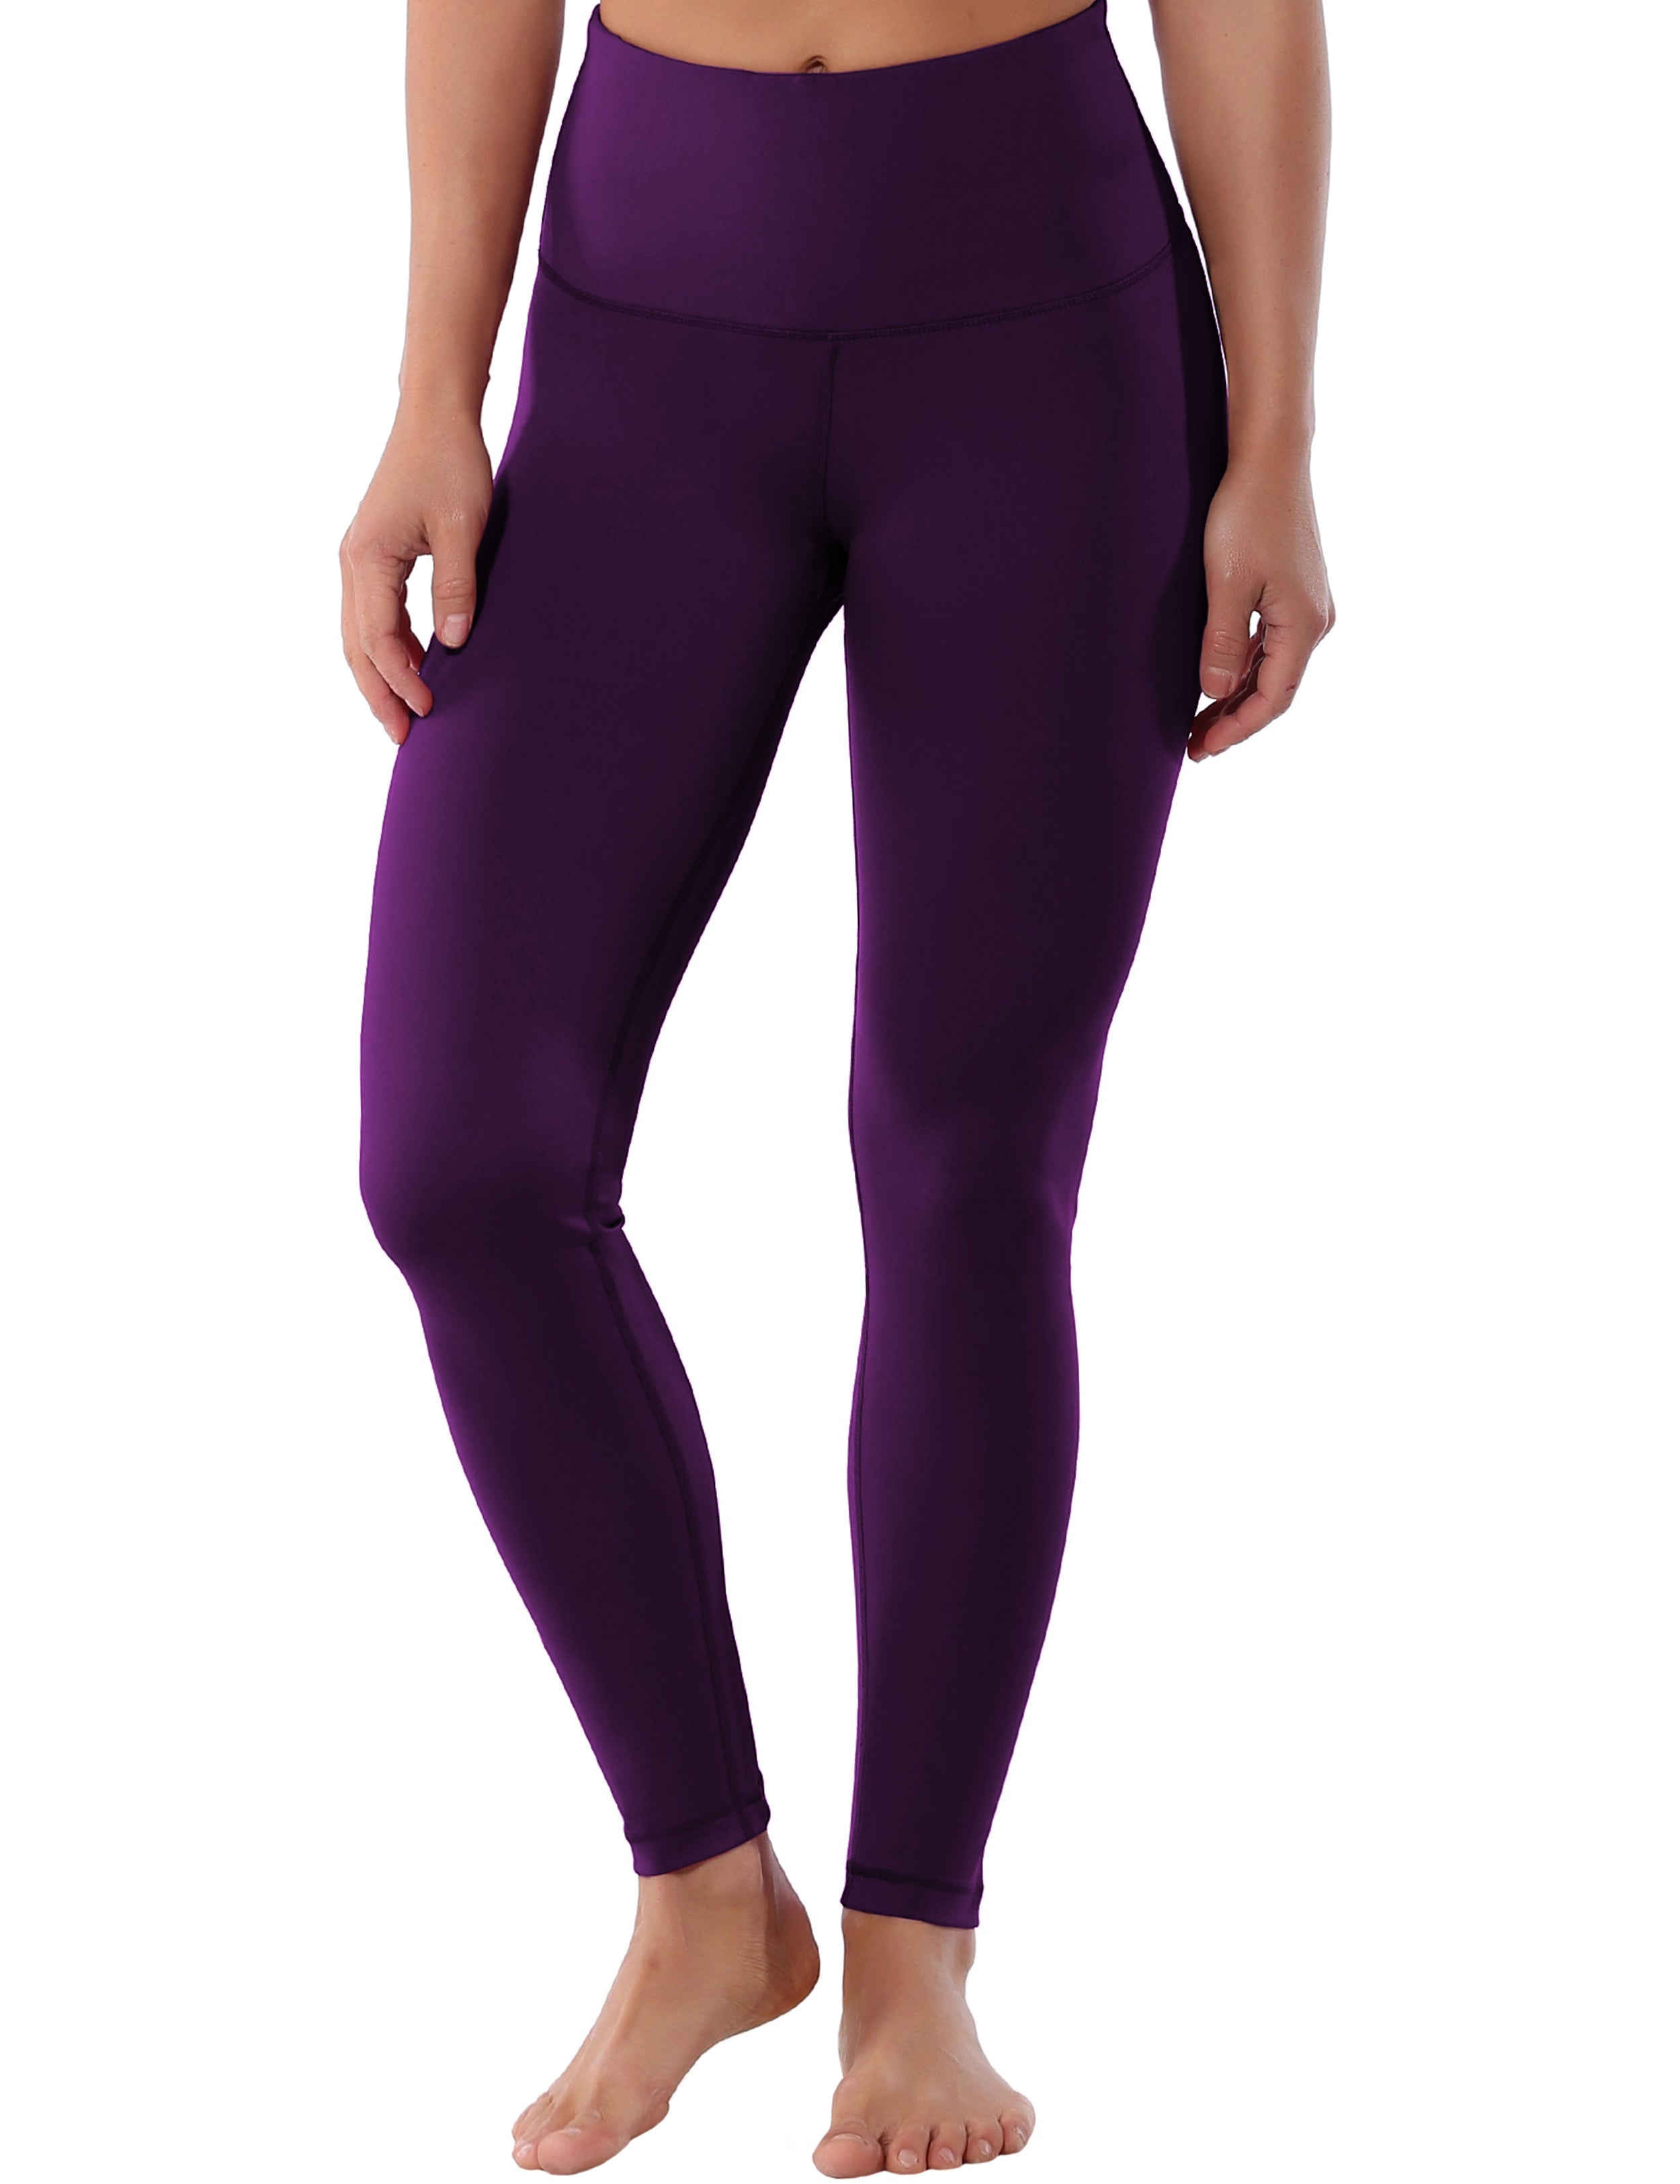 High Waist Yoga Pants plum 75%Nylon/25%Spandex Fabric doesn't attract lint easily 4-way stretch No see-through Moisture-wicking Tummy control Inner pocket Four lengths